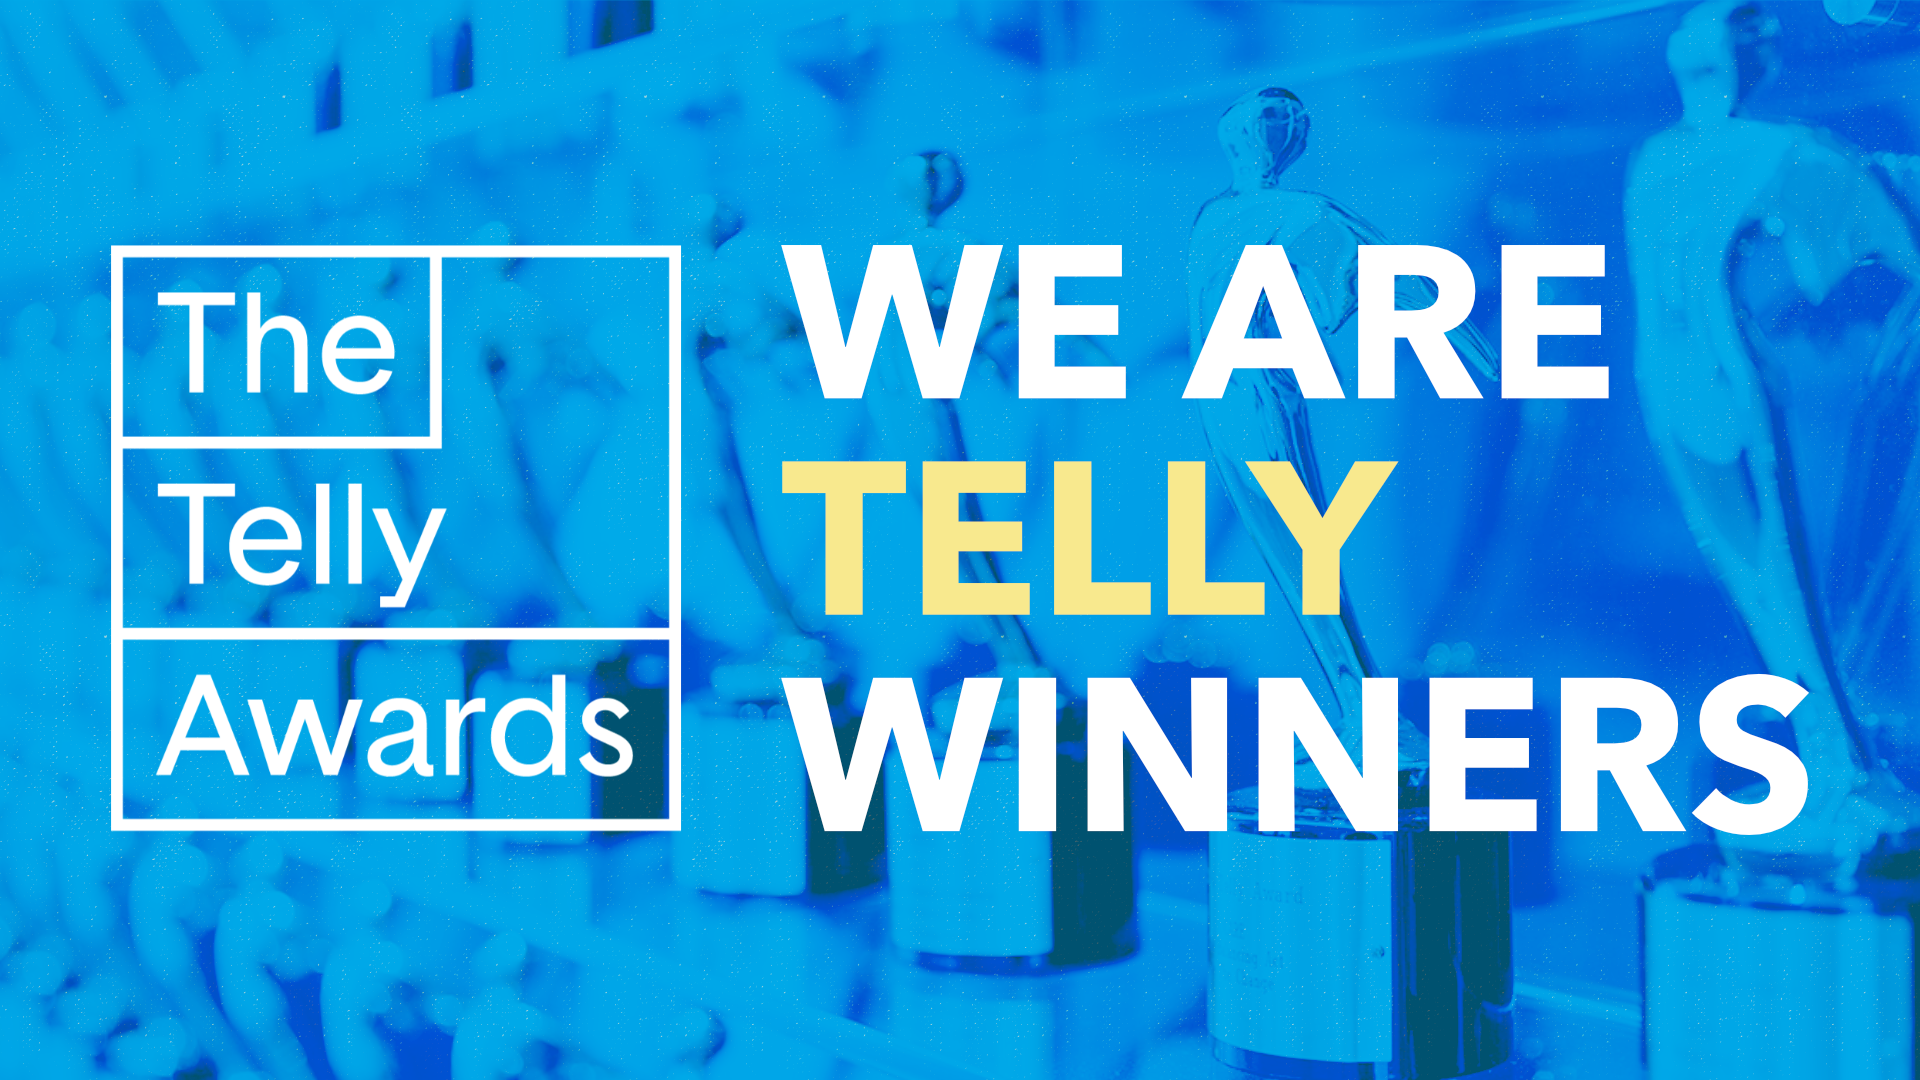 ACD named a Silver Winner in Annual Telly Awards